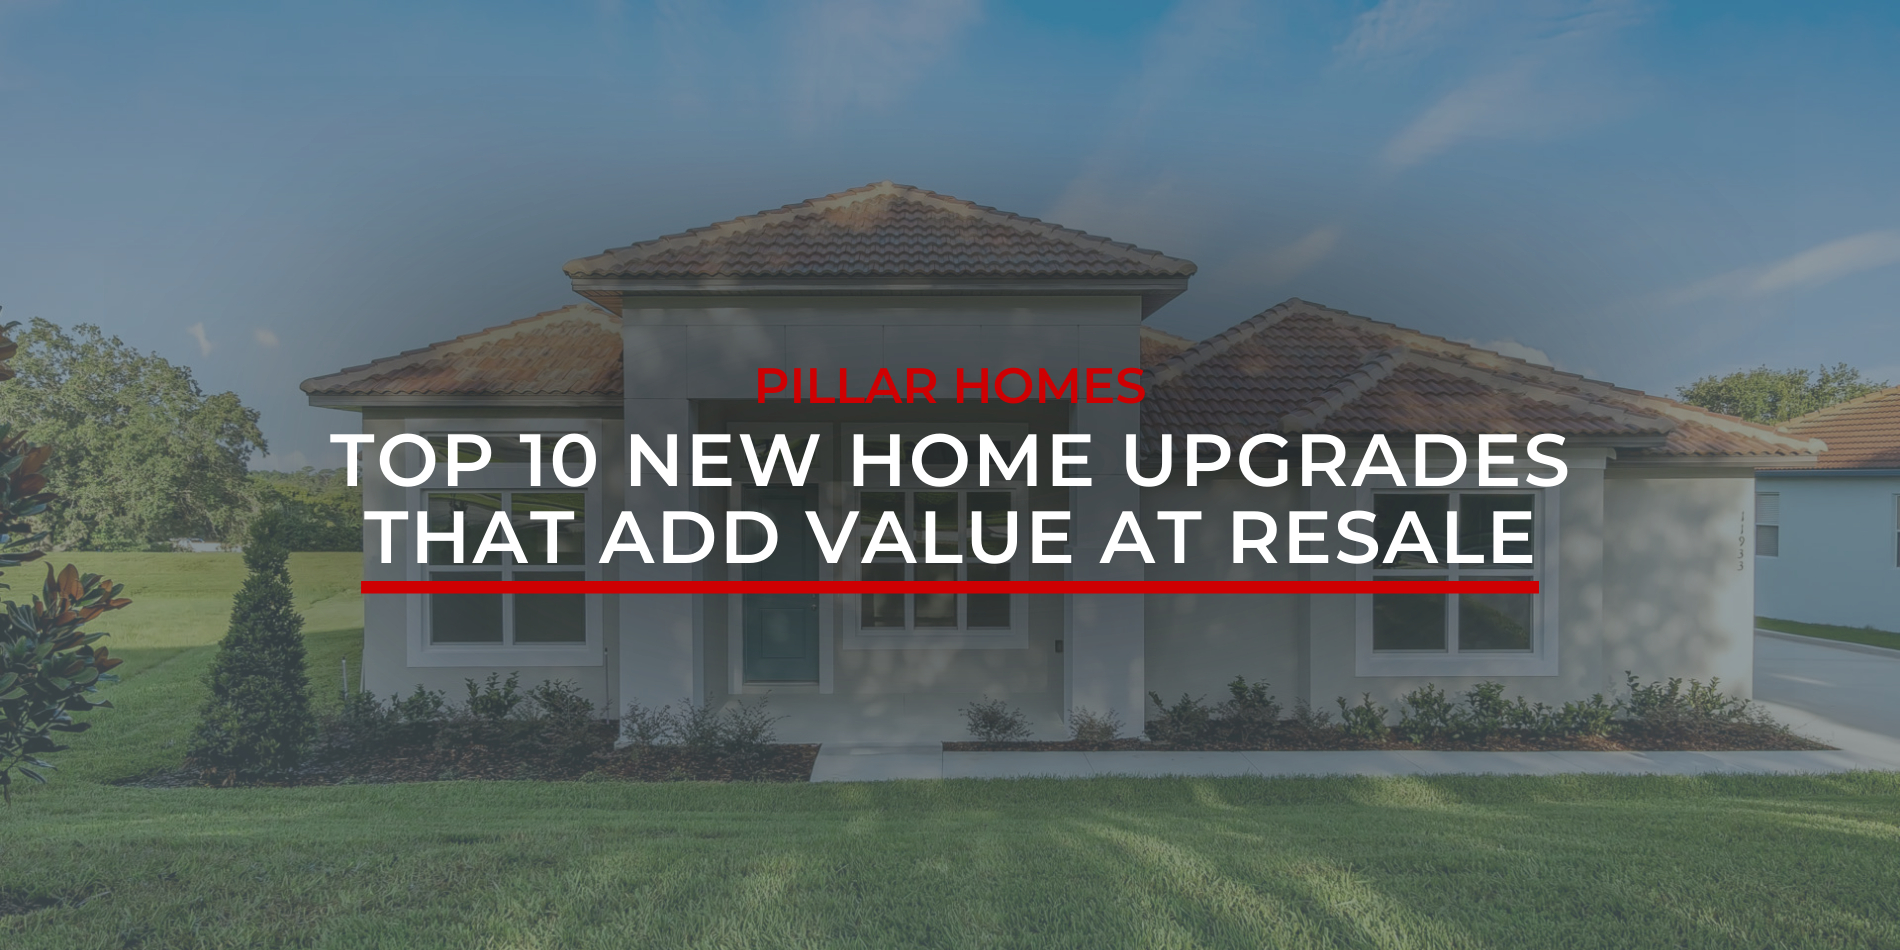 Home upgrades that add value Pillar Homes Clermont Home Builder